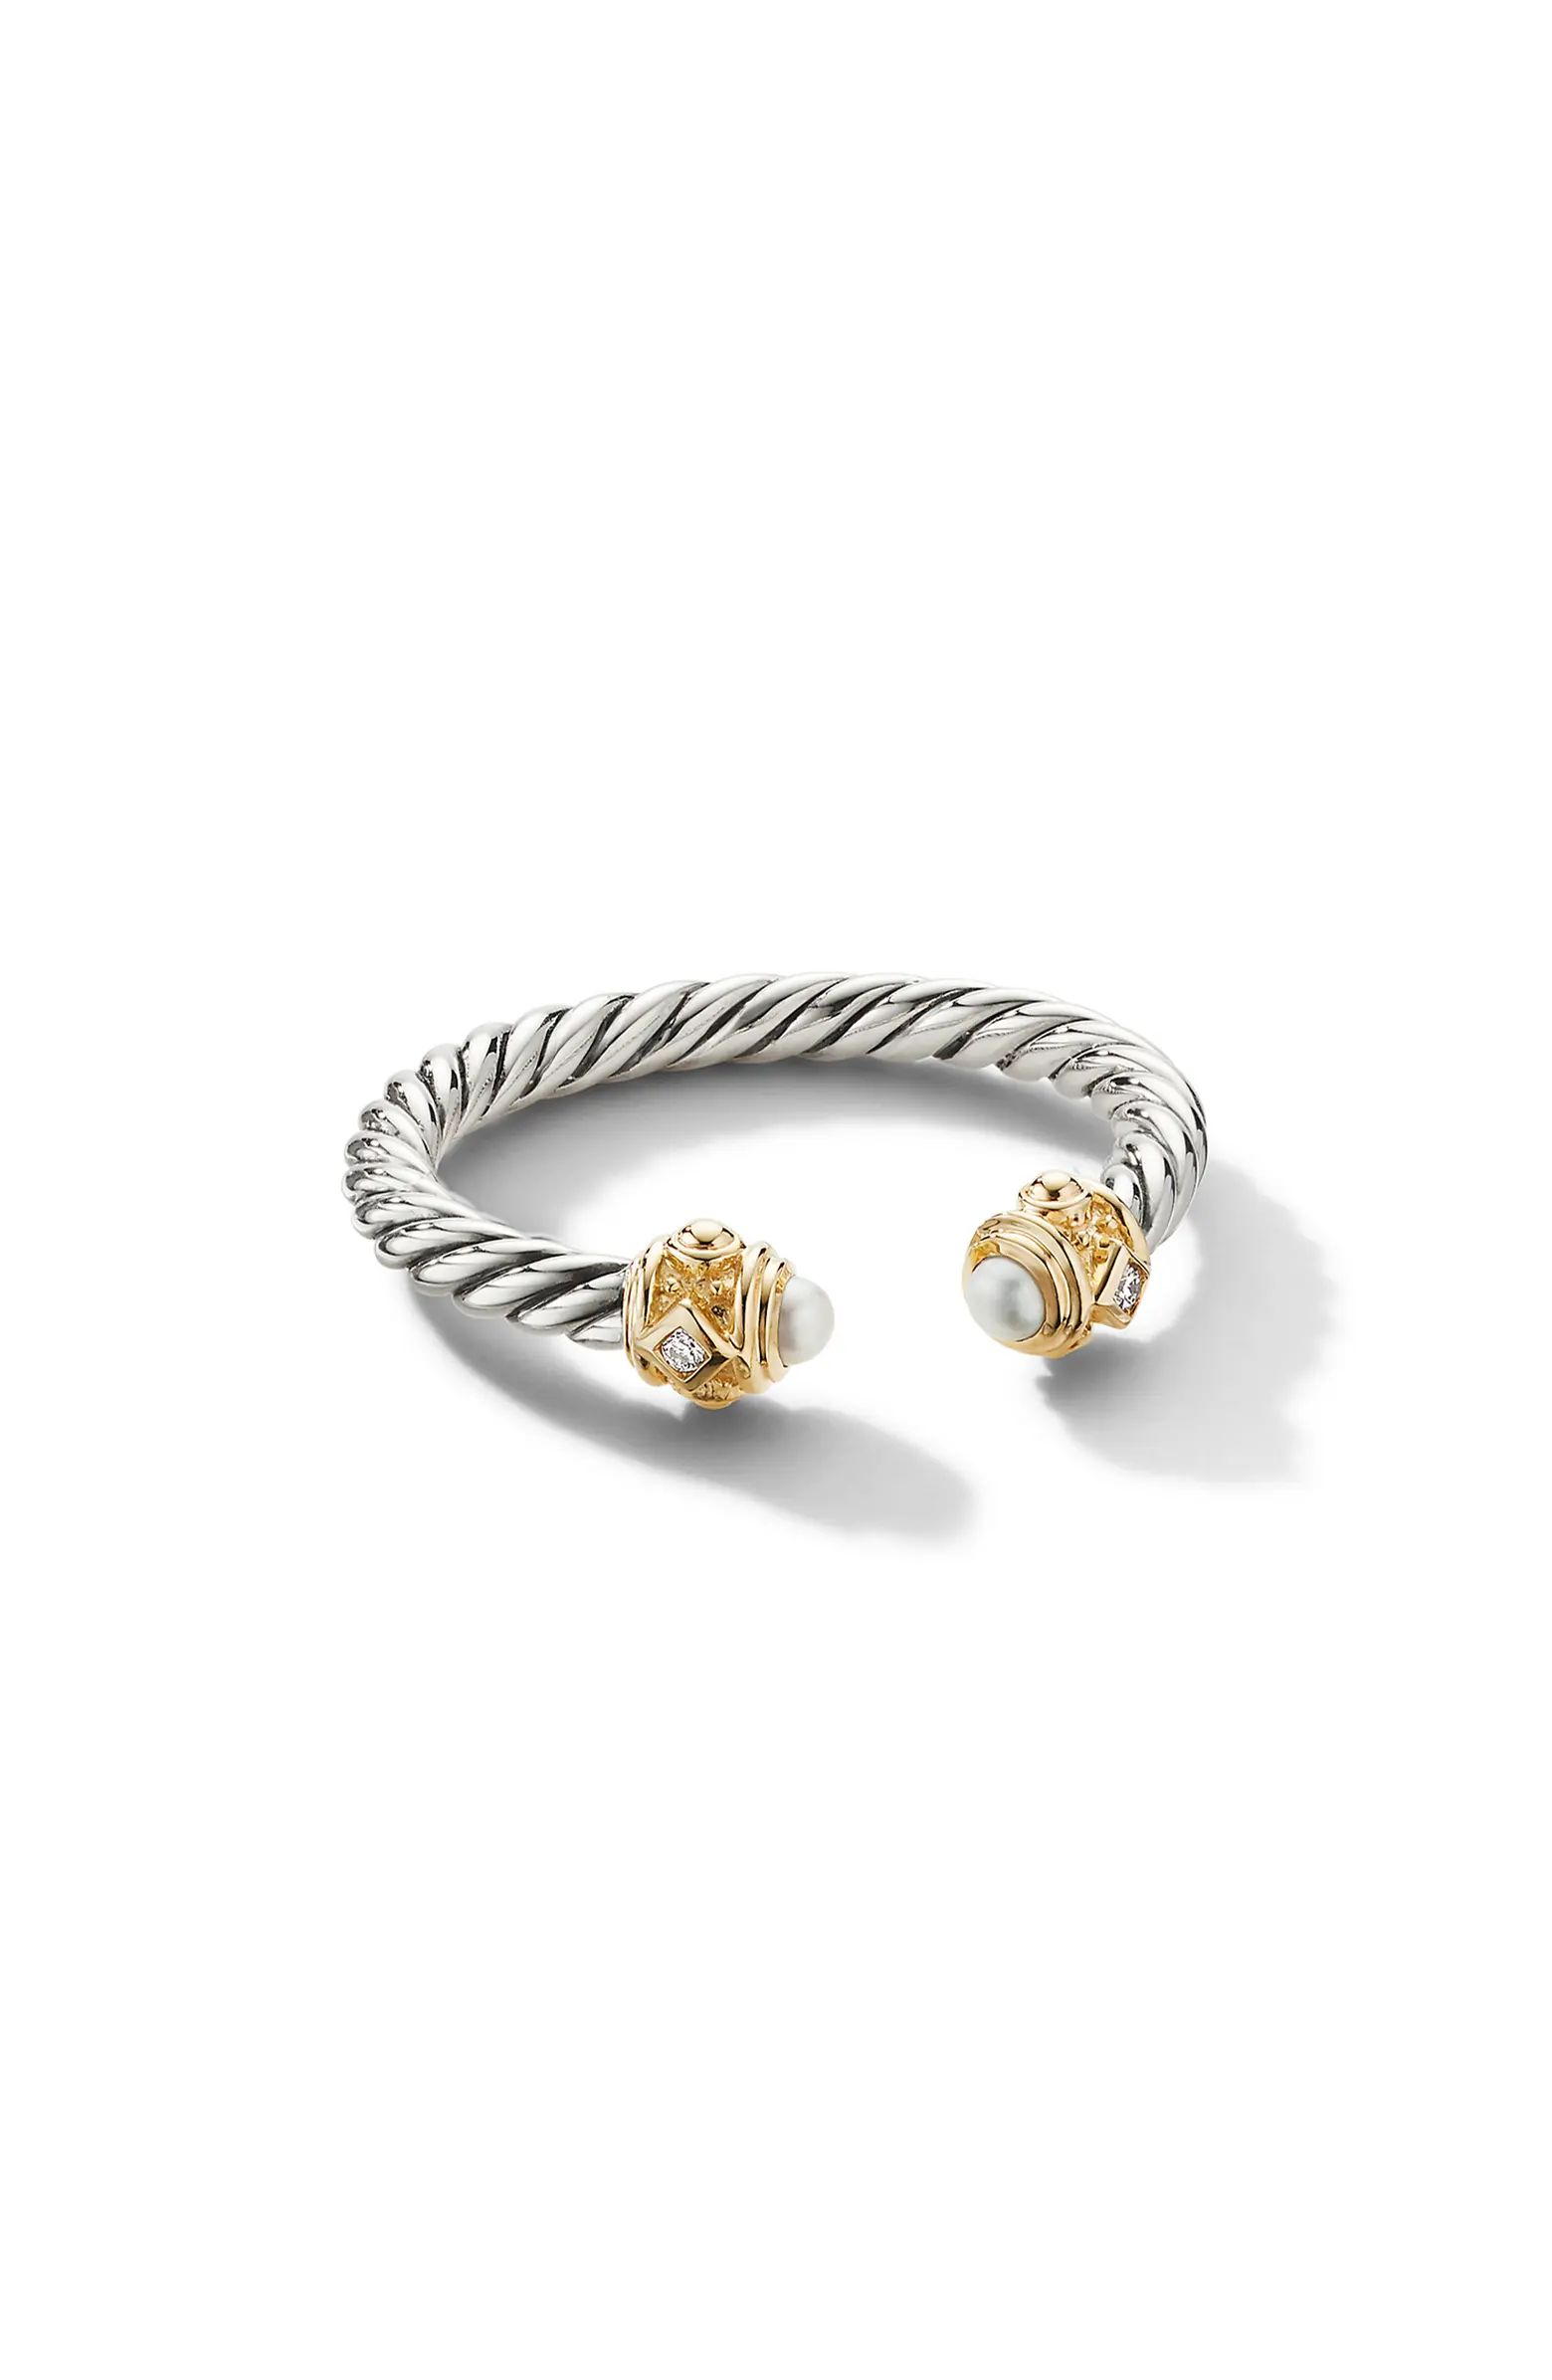 Renaissance Ring in 14K Gold with Diamonds | Nordstrom